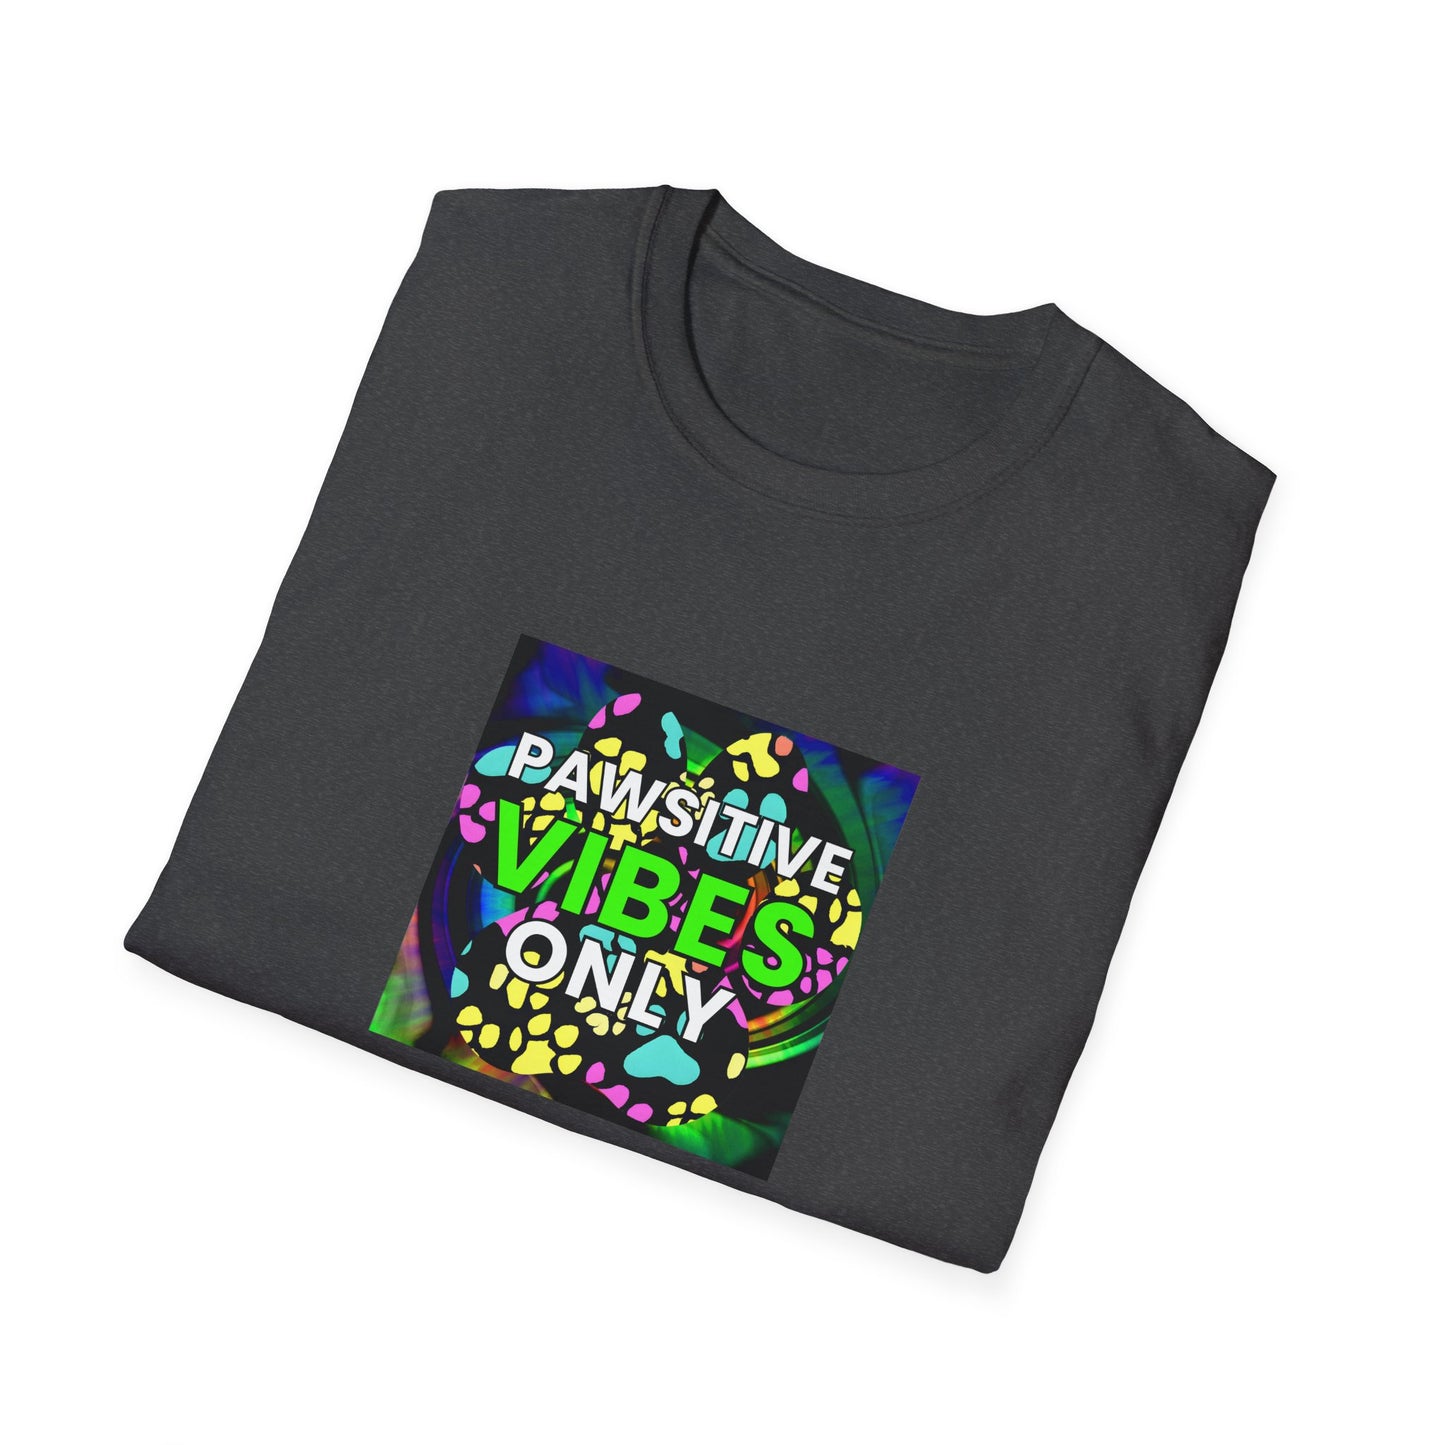 The Optimist Mastermind - Wiley Witt - "Pawsitive Vibes Only" Unisex Tee